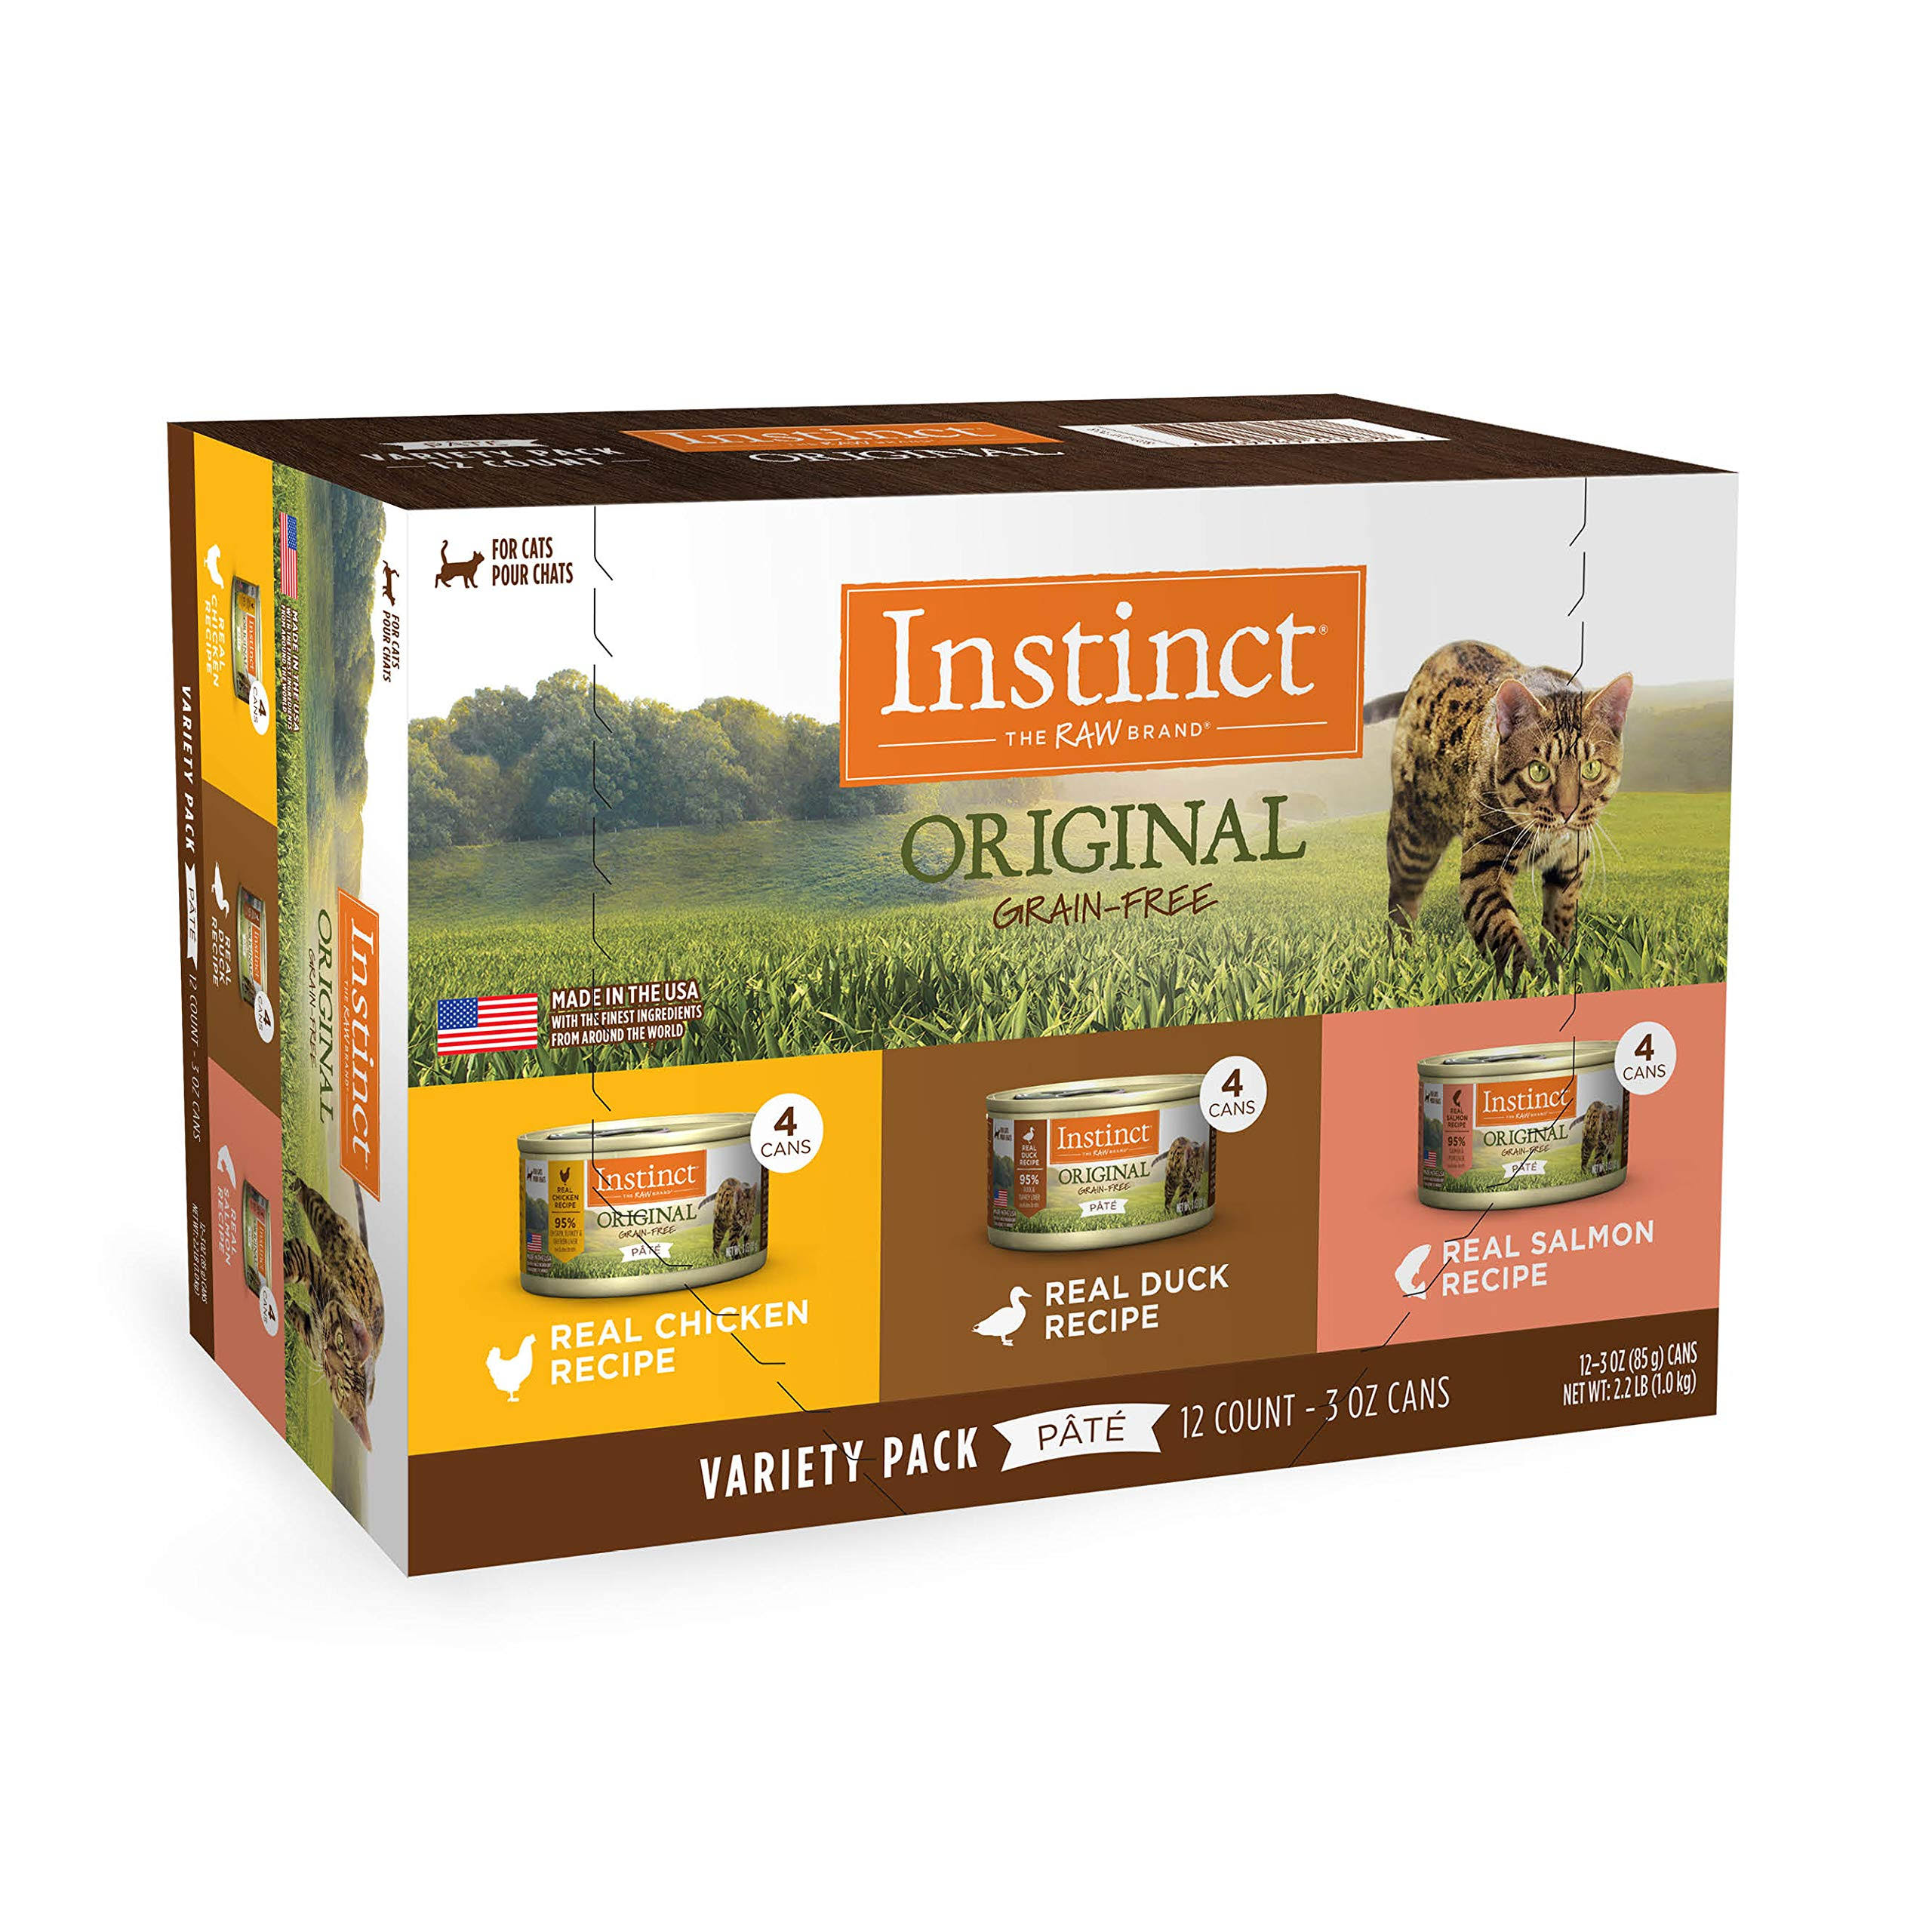 Instinct Original Grain Free Recipe Variety Pack Natural Wet Canned Cat Food by Nature's Variety, 3 Ounce (Pack of 12)